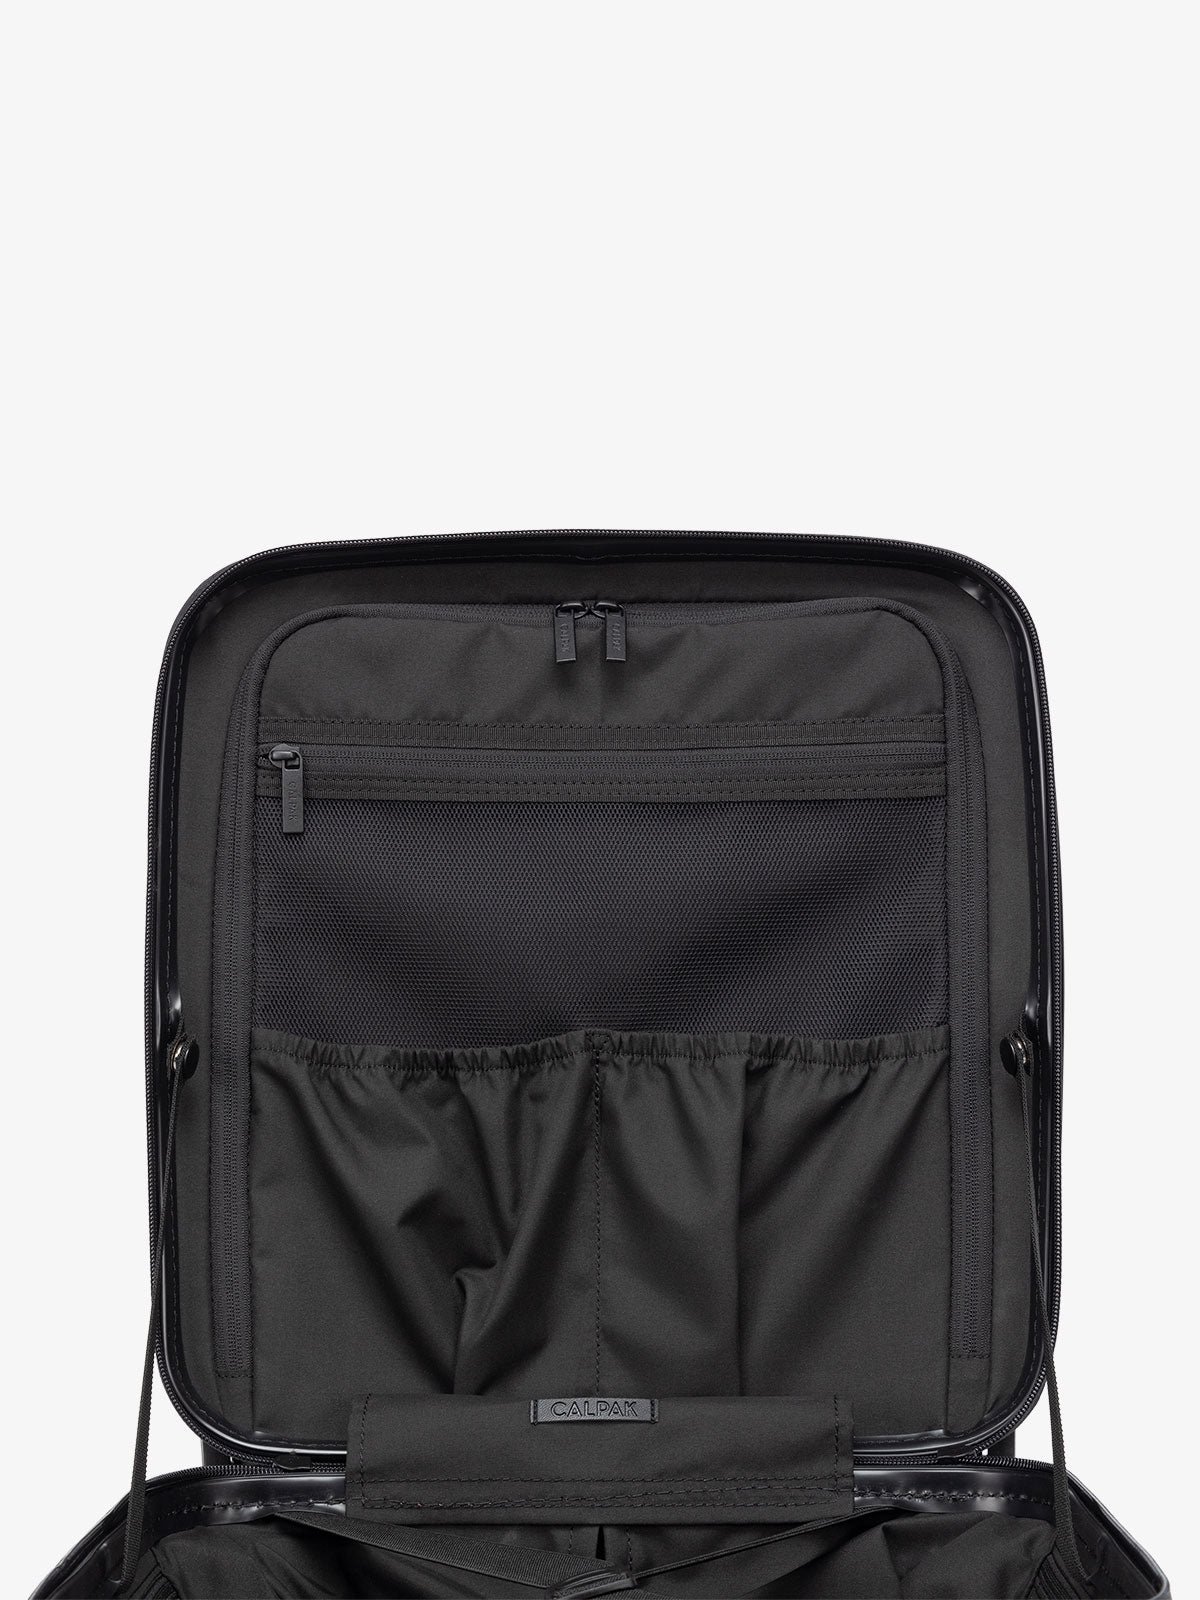 Hue mini carry on with zippered divider and multiple pockets